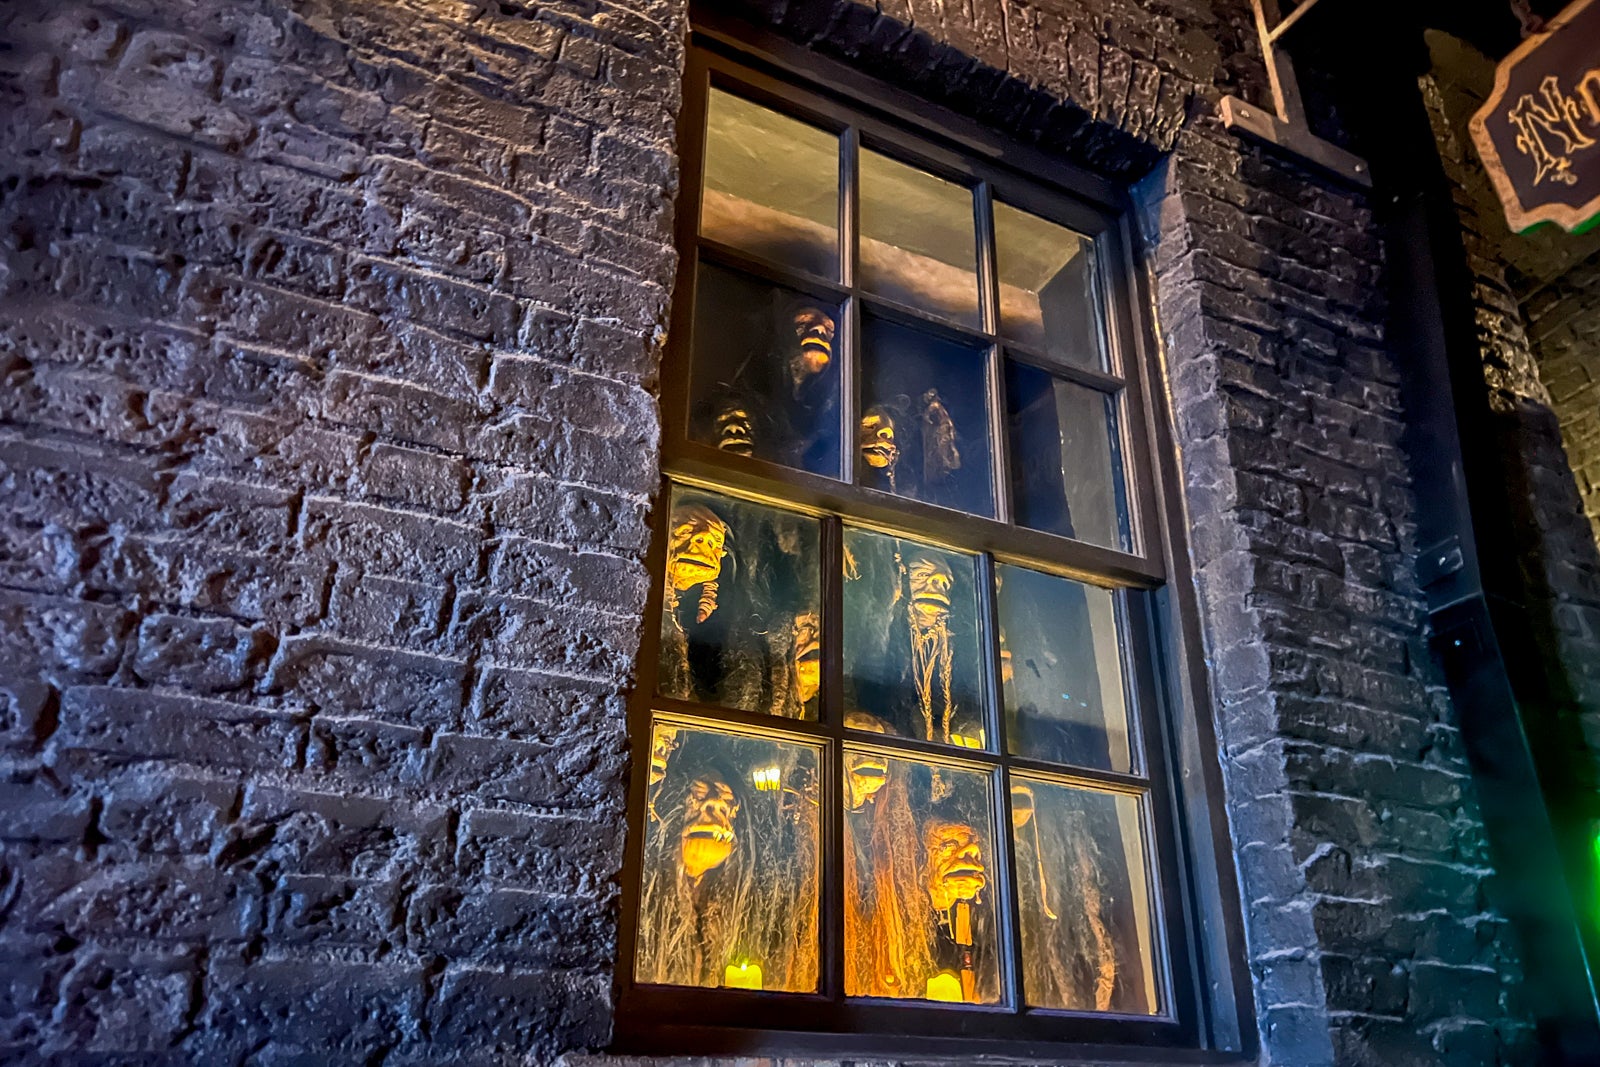 Shrunked heads singing in a window at Universal Orlando's Wizarding World of Harry Potter